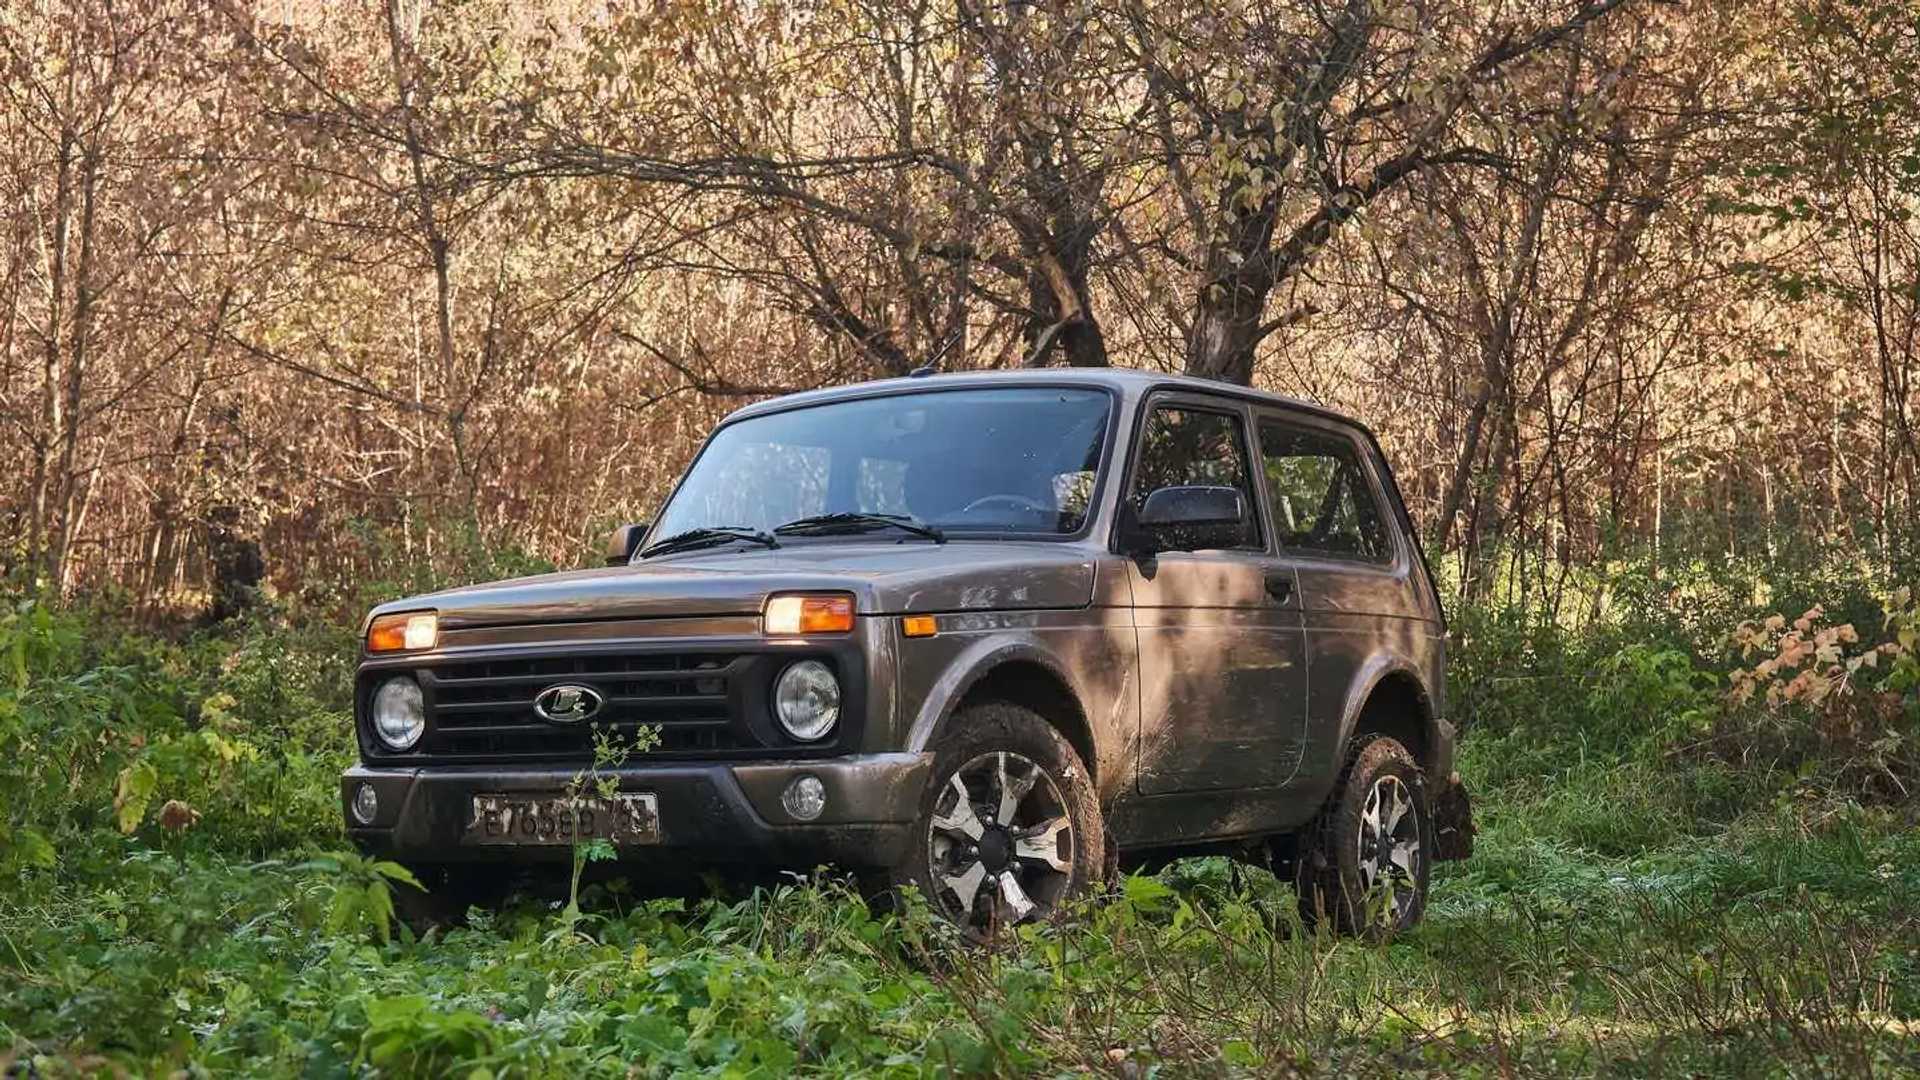 https://s1.cdn.autoevolution.com/images/news/2024-lada-niva-is-finally-getting-abs-but-it-doesn-t-even-have-any-airbags-225535_1.jpeg